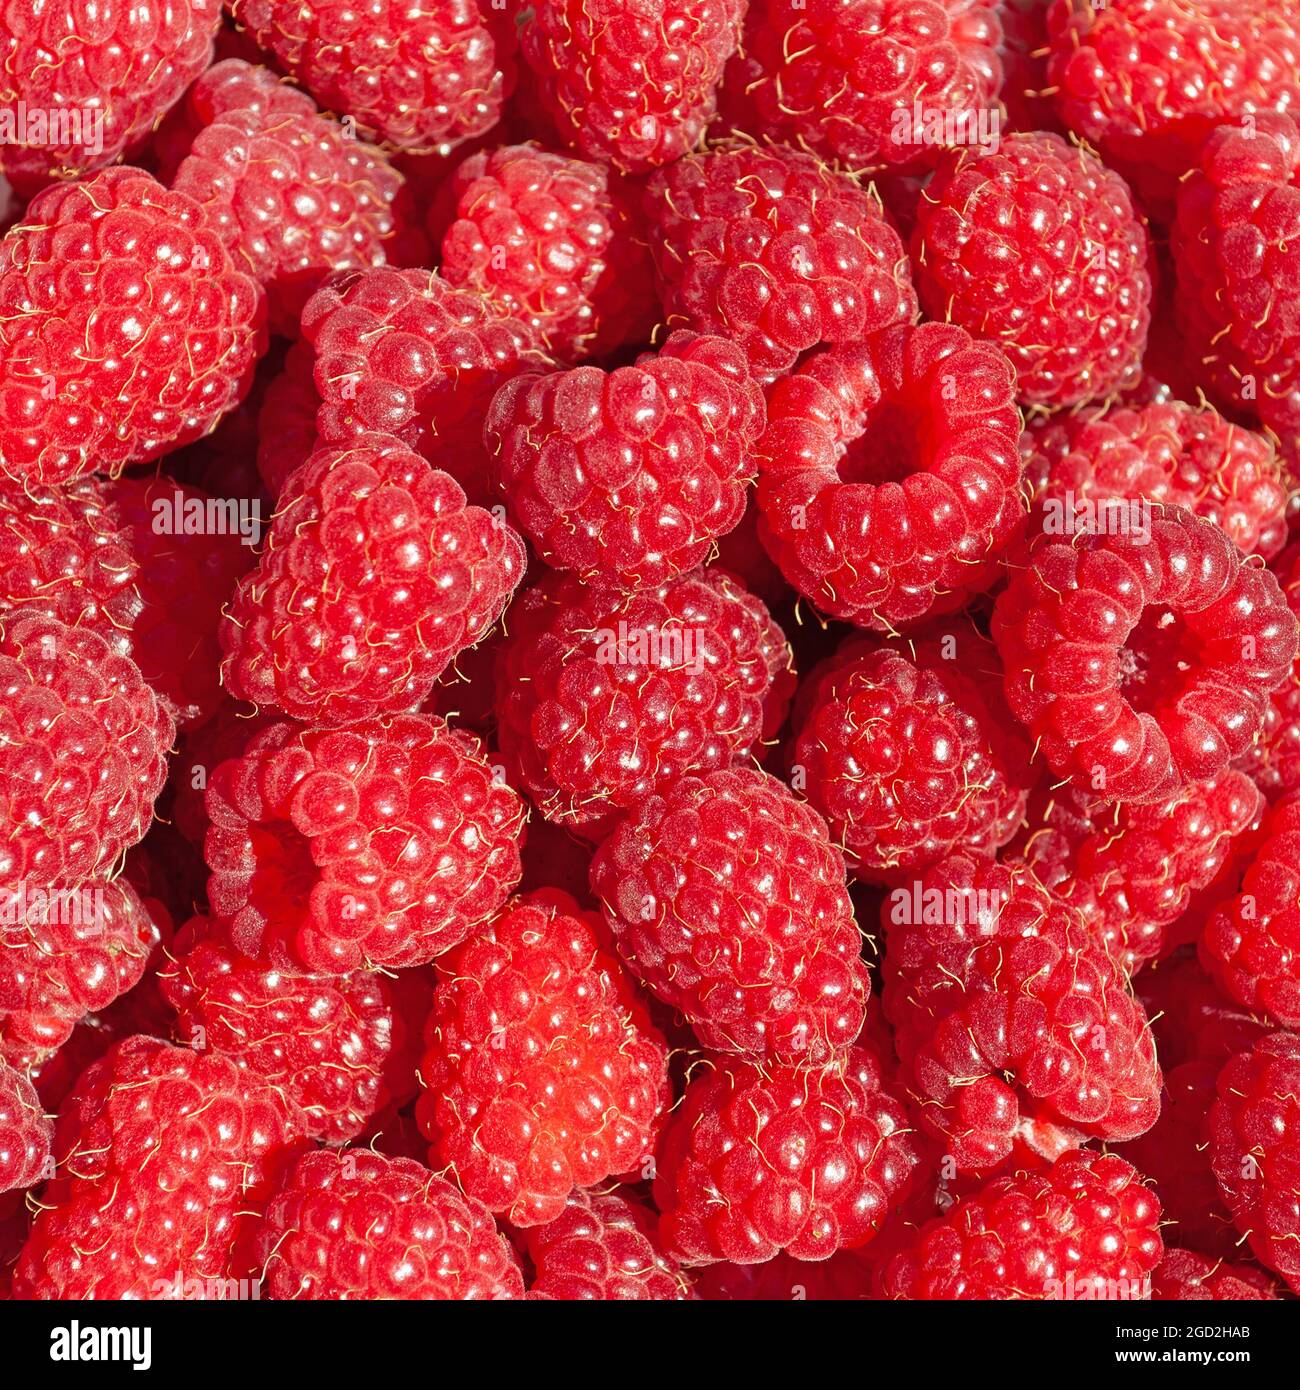 Freshly picked raspberries in a close-up Stock Photo